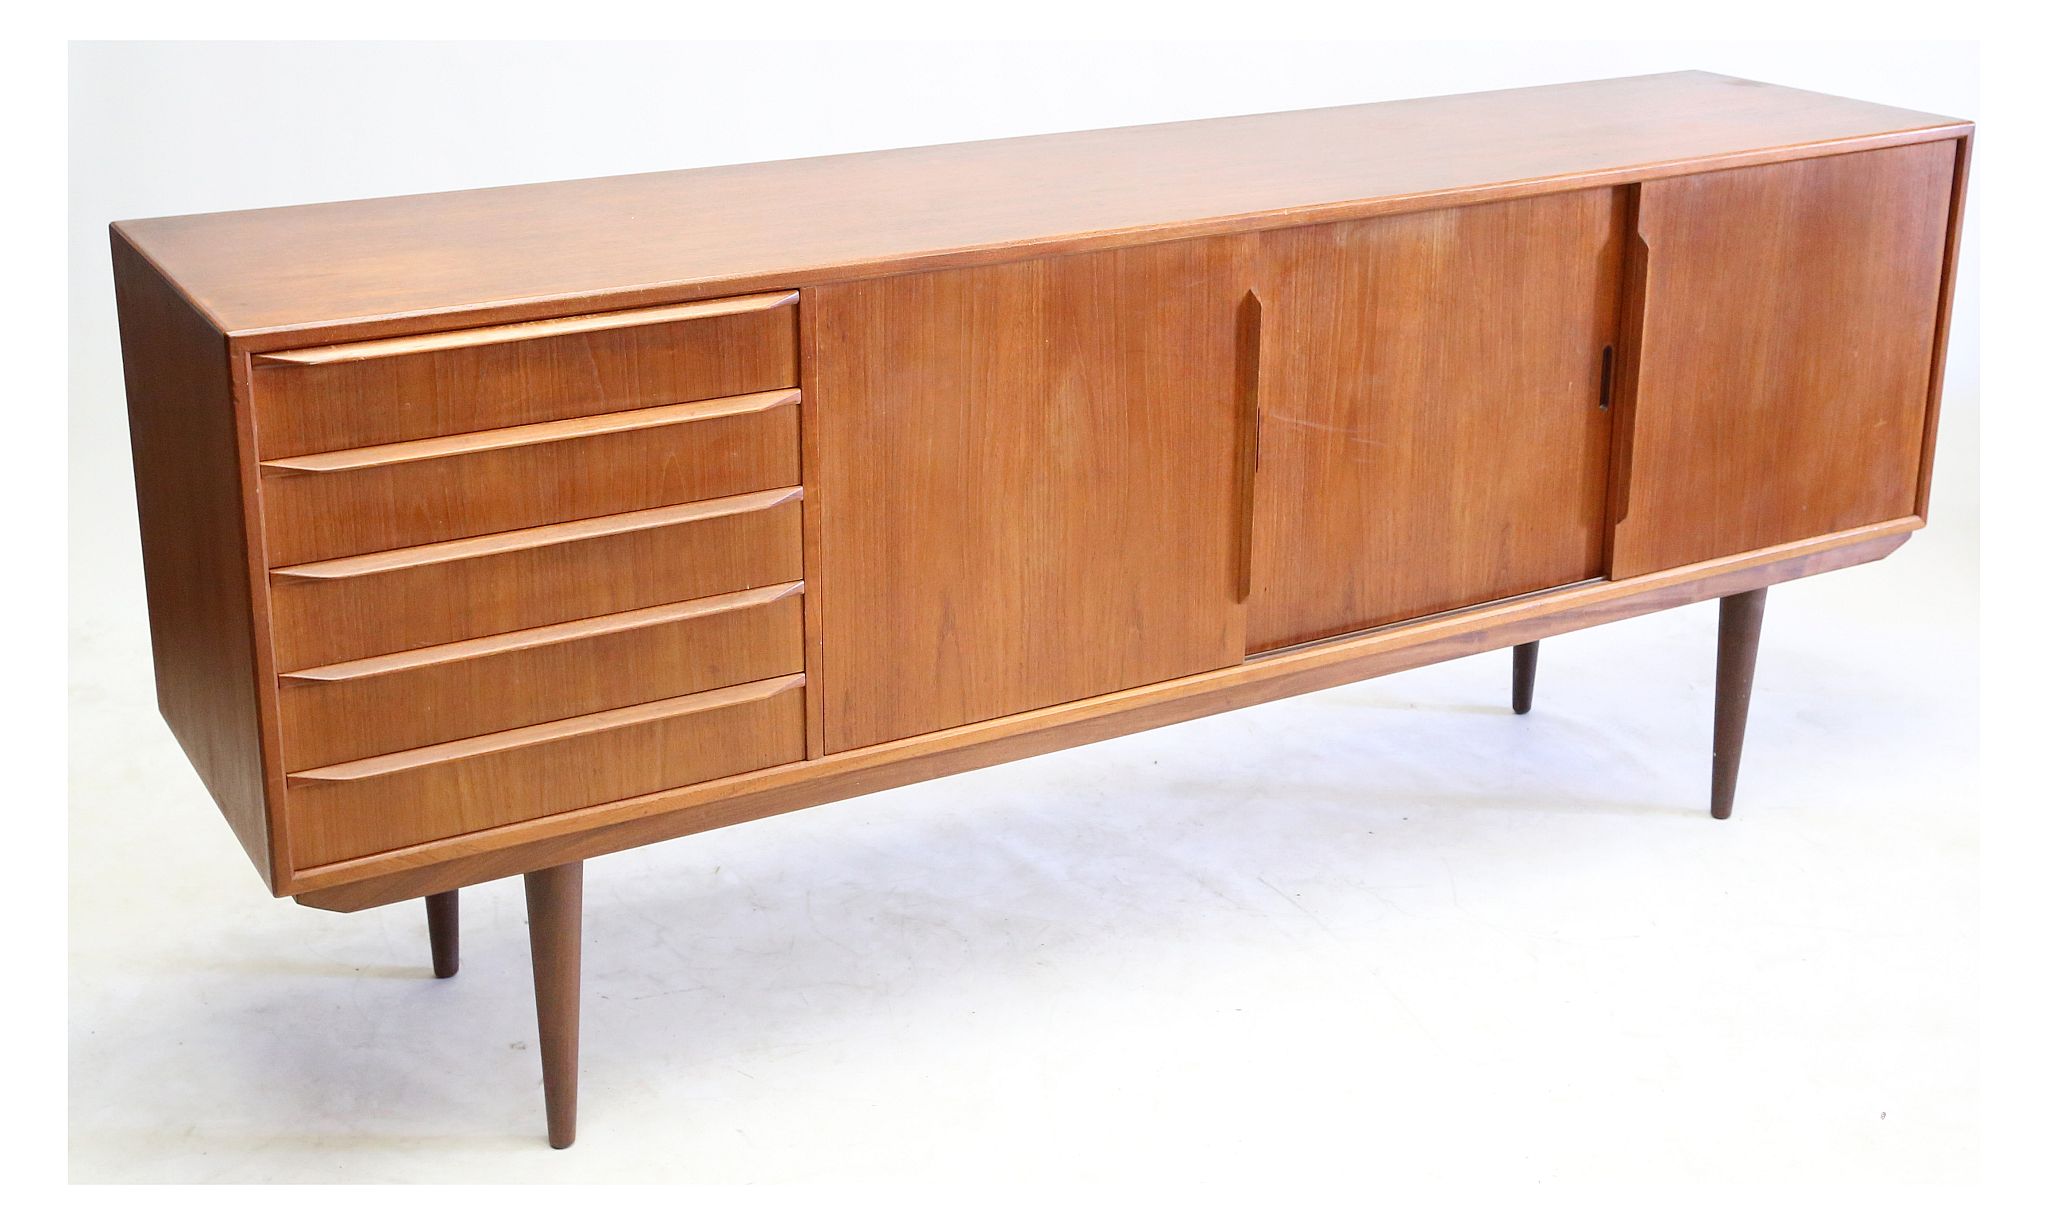 A DANISH 1960s TEAK SIDEBOARD, attributed to Svend - Image 2 of 10